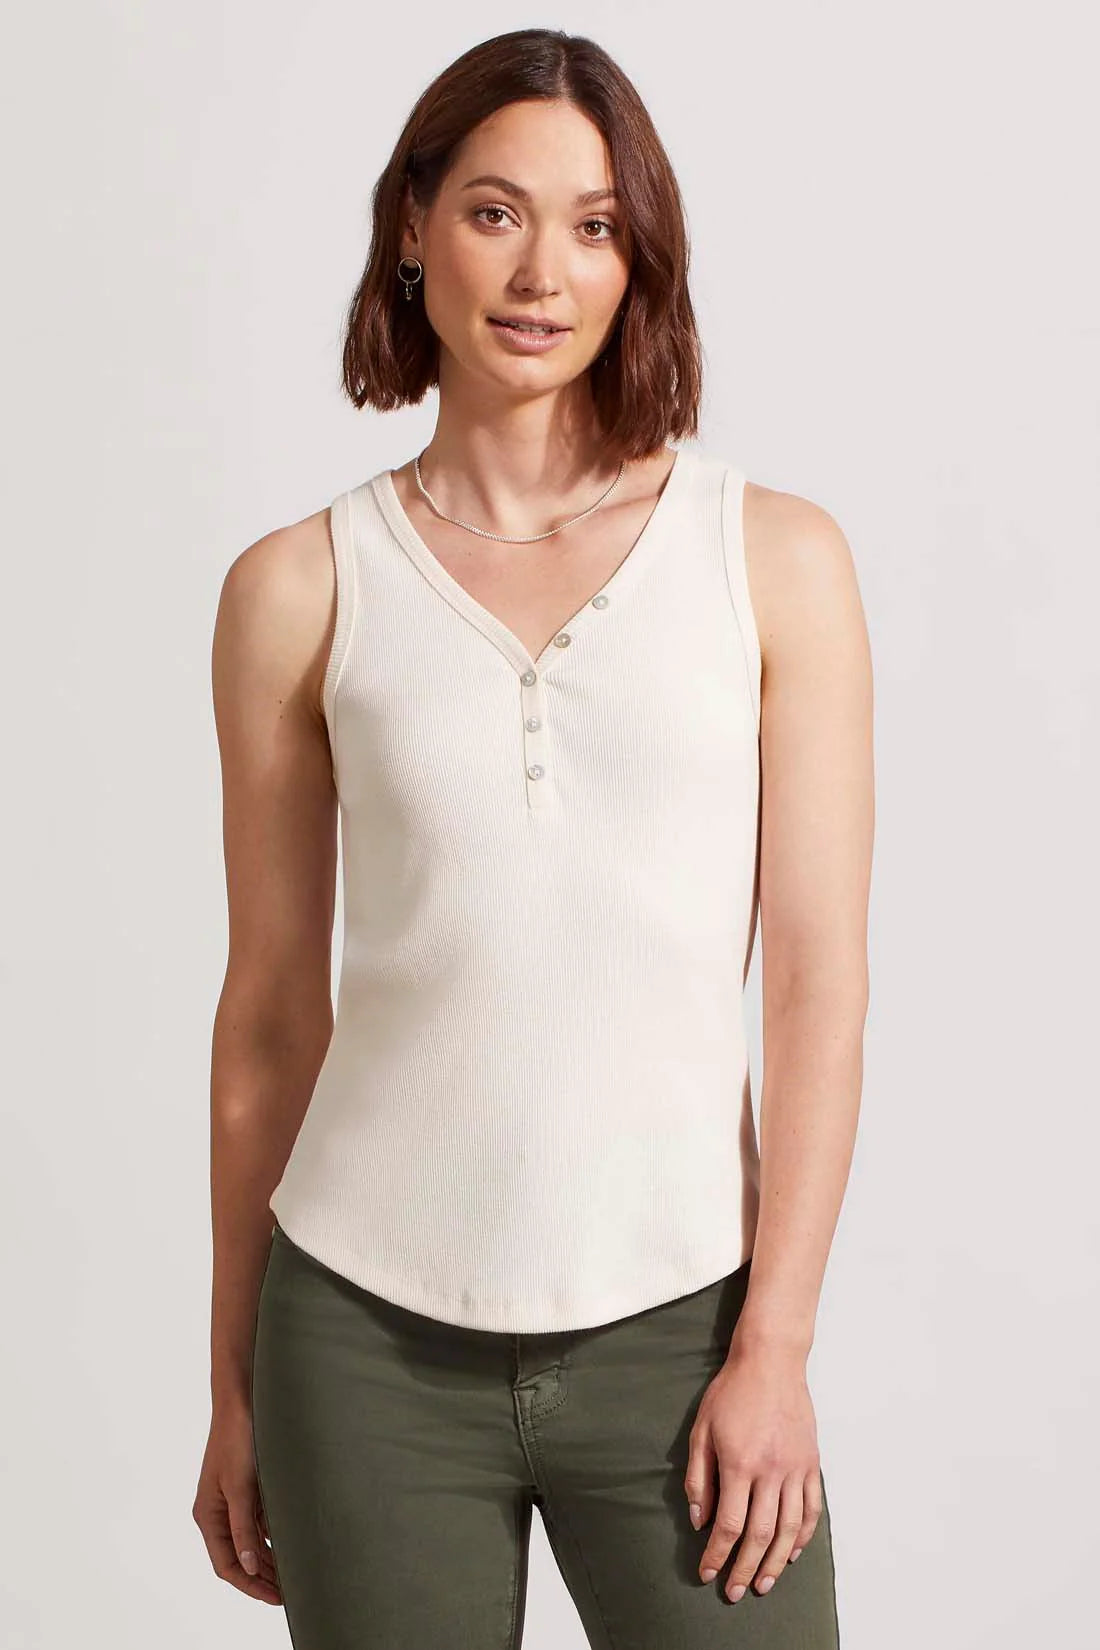 Tribal Henley Tank with Buttons - Sandust Clothing - Tops - Shirts - SS Knits - Sleeveless Knits by Tribal | Grace the Boutique